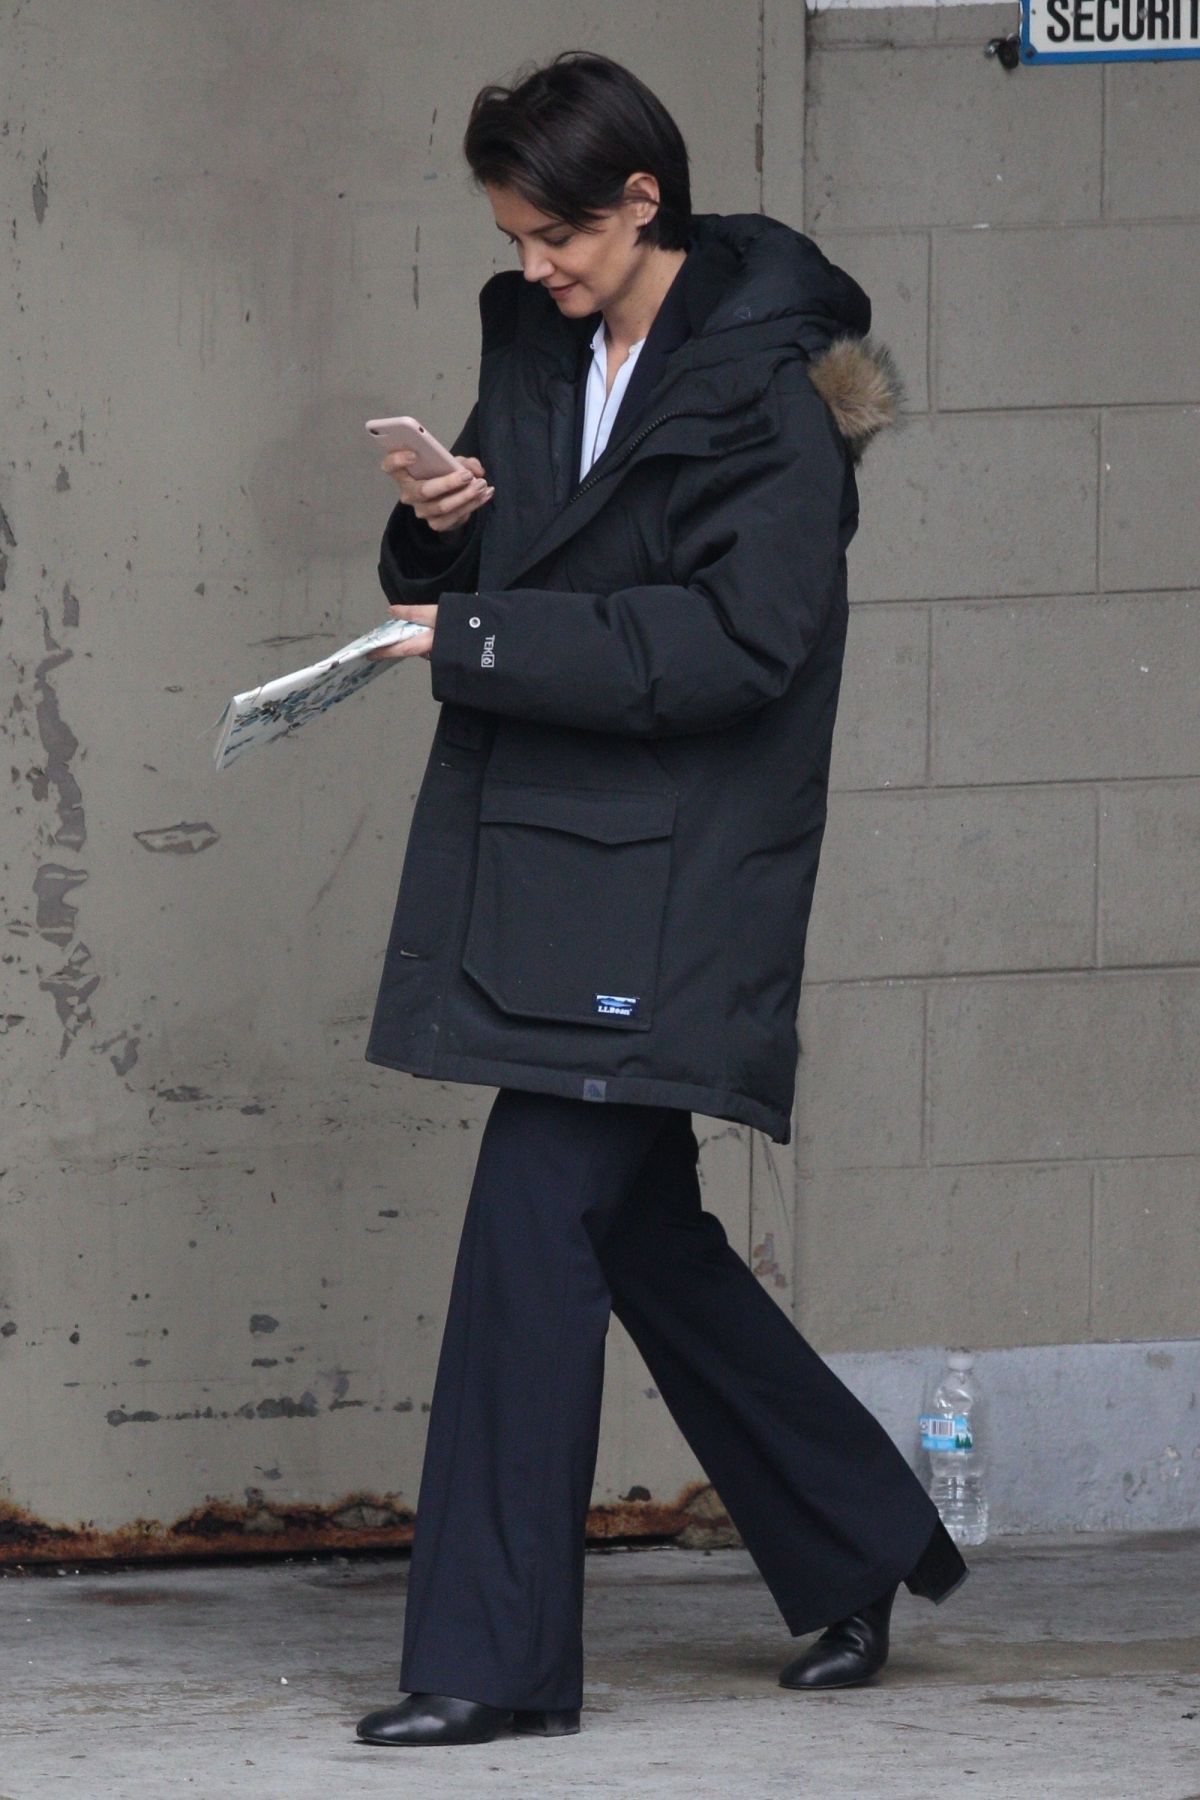 KATIE HOLMES Out and About in Chicago 03/27/2018 – HawtCelebs